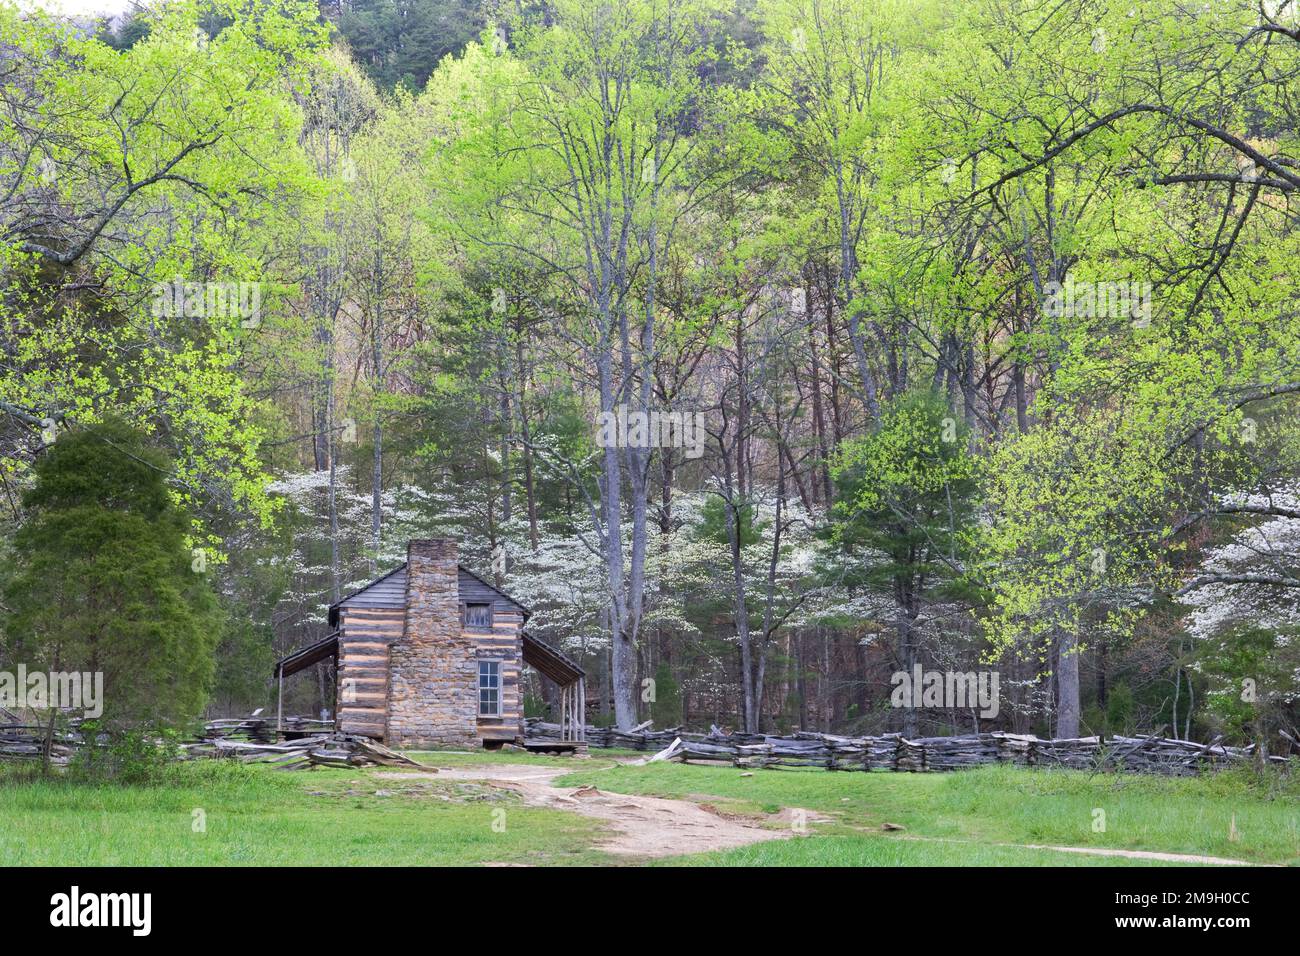 66745-04320 John Oliver Cabin in spring, Cades Cove area, Great Smoky Mountains National Park, TN Stock Photo